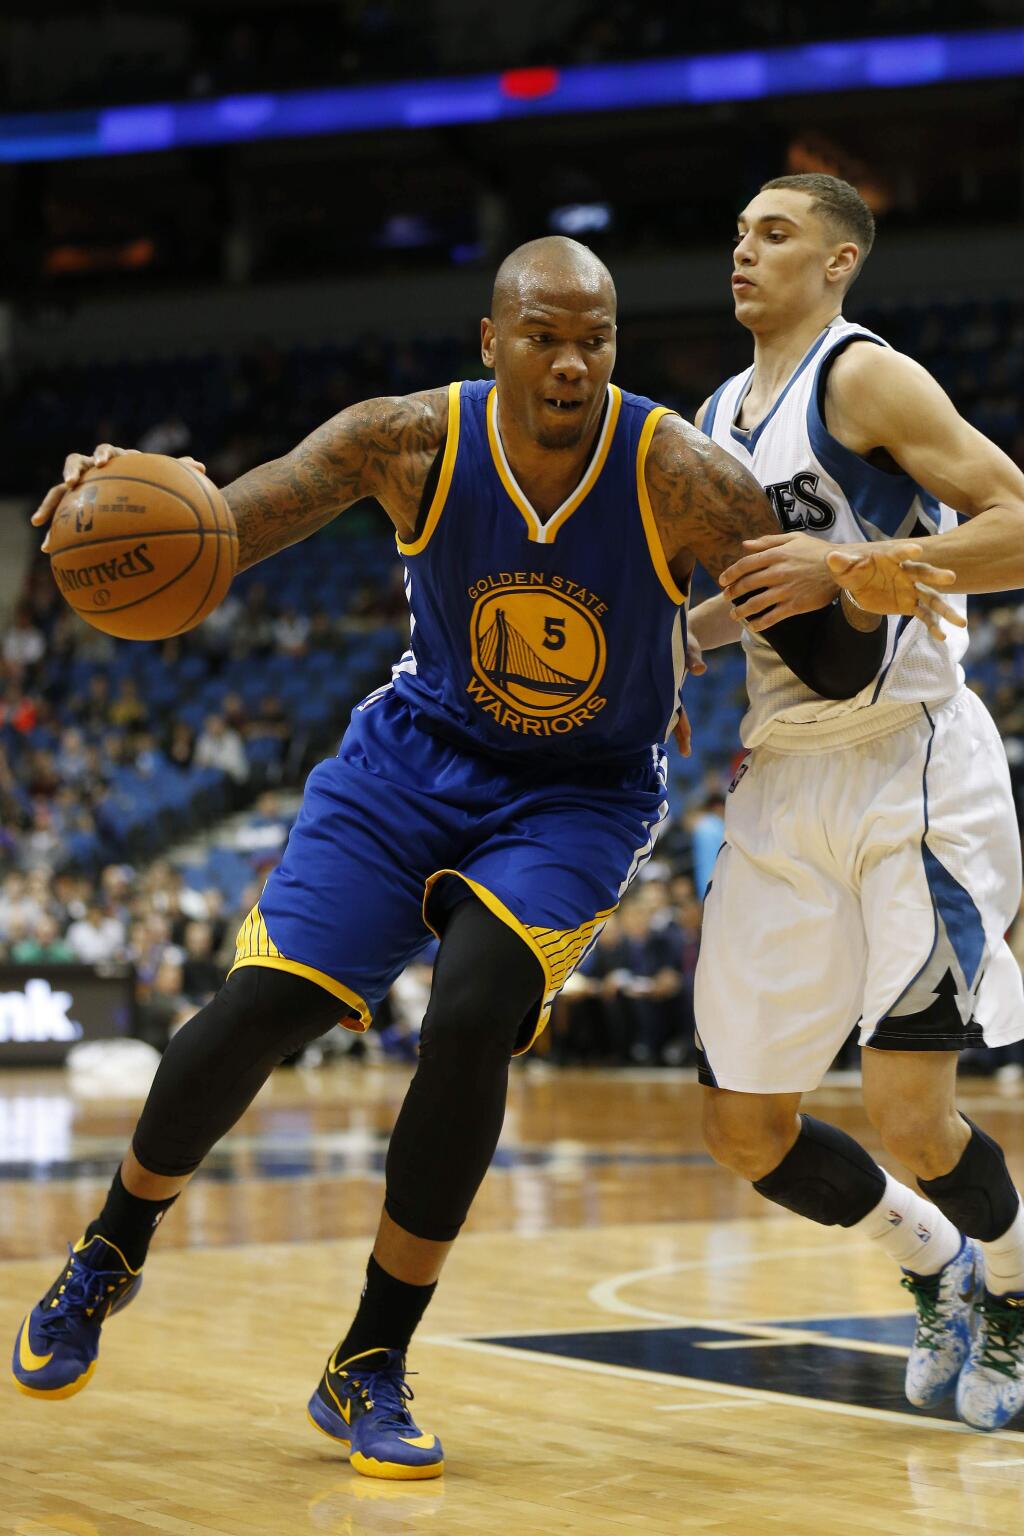 Golden State Warriors center Marreese Speights (5) pushes the ball around Minnesota Timberwolves guard Zach LaVine (8) during the second half of an NBA basketball game Monday, Dec, 8, 2014, in Minneapolis. The Warriors won 102-86. (AP Photo/Stacy Bengs)